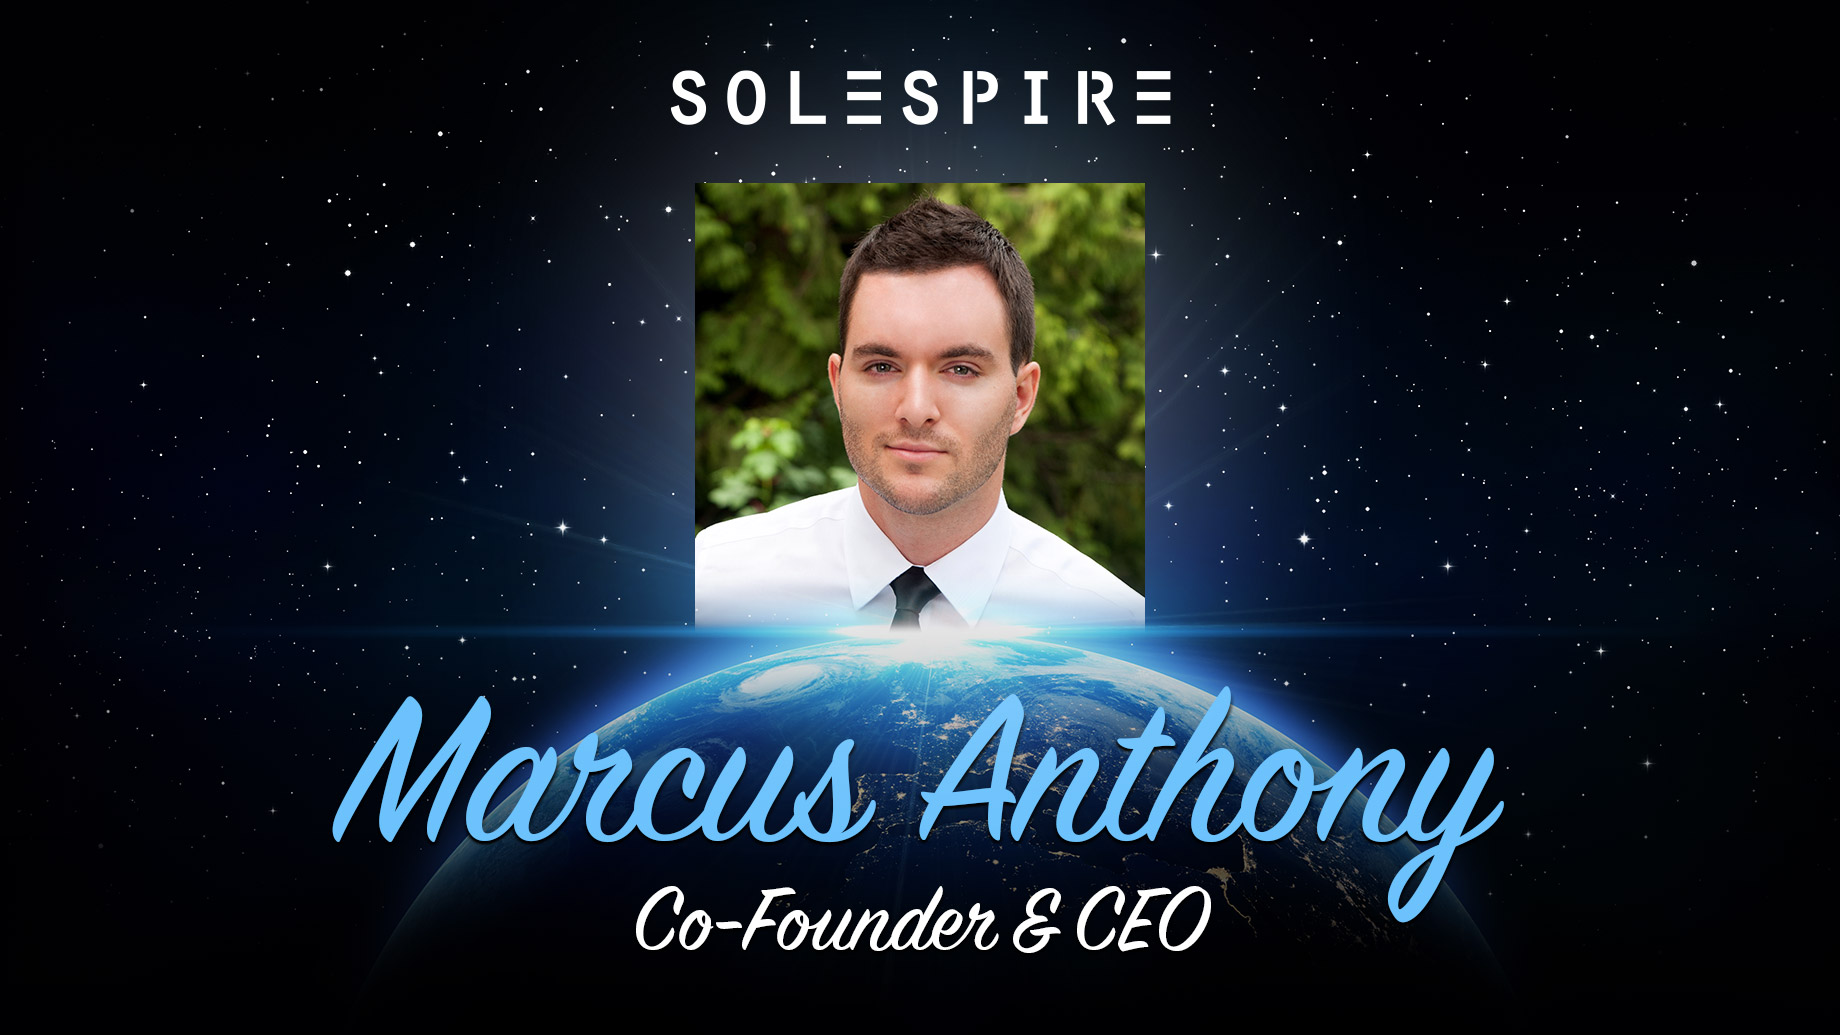 Marcus Anthony - Solespire Co-Founder & CEO